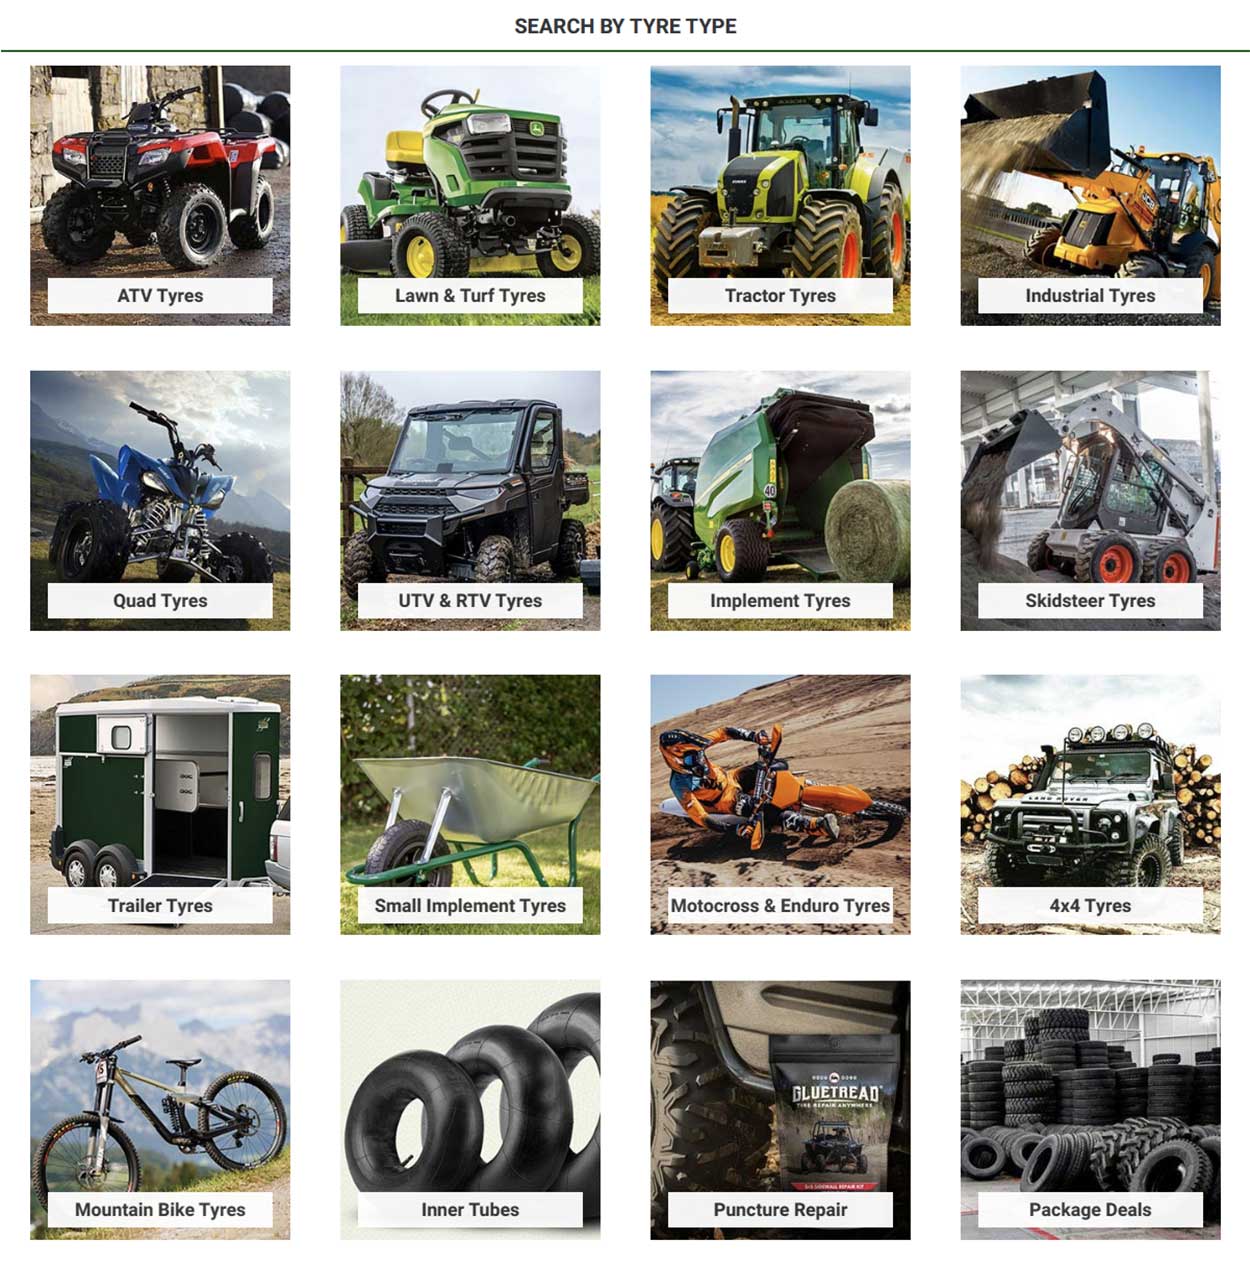 Search by Type-Terrain Tyres